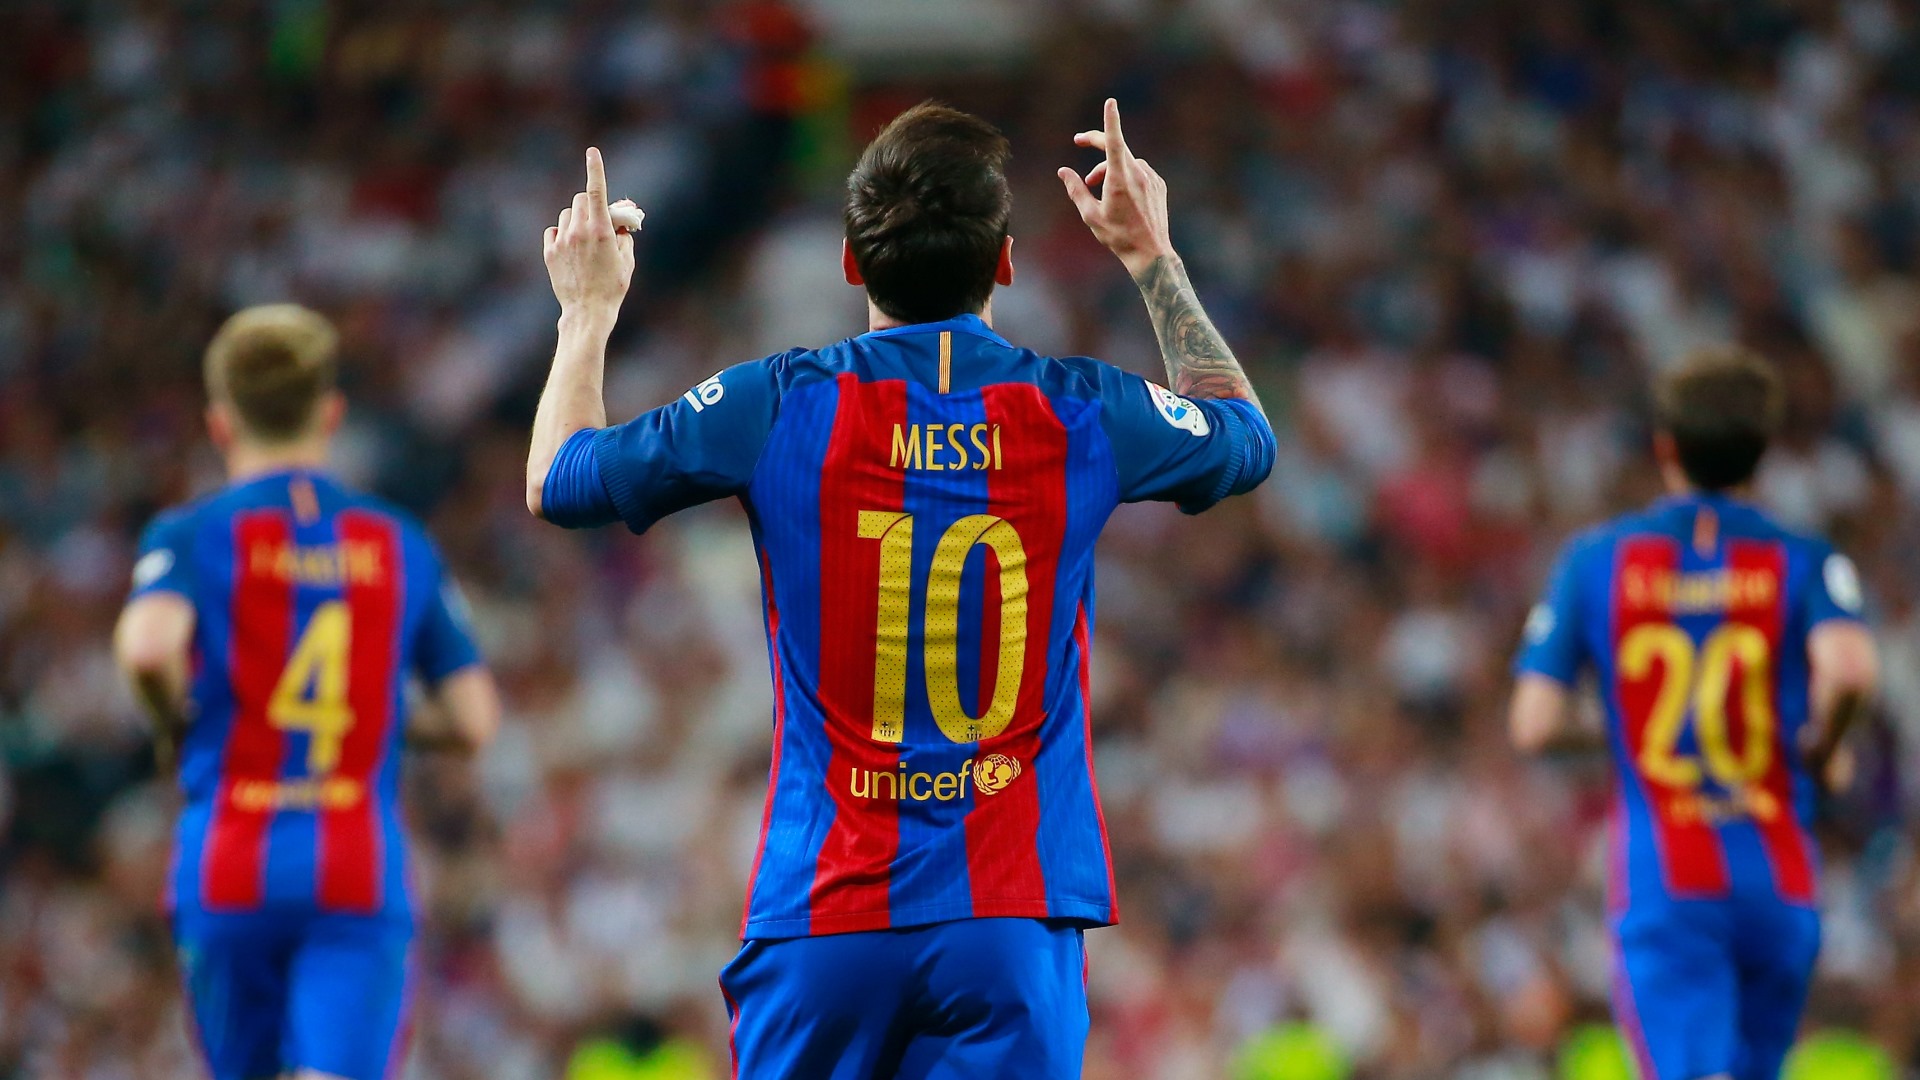 Messi Wins Clasico For Barca Against Real Madrid